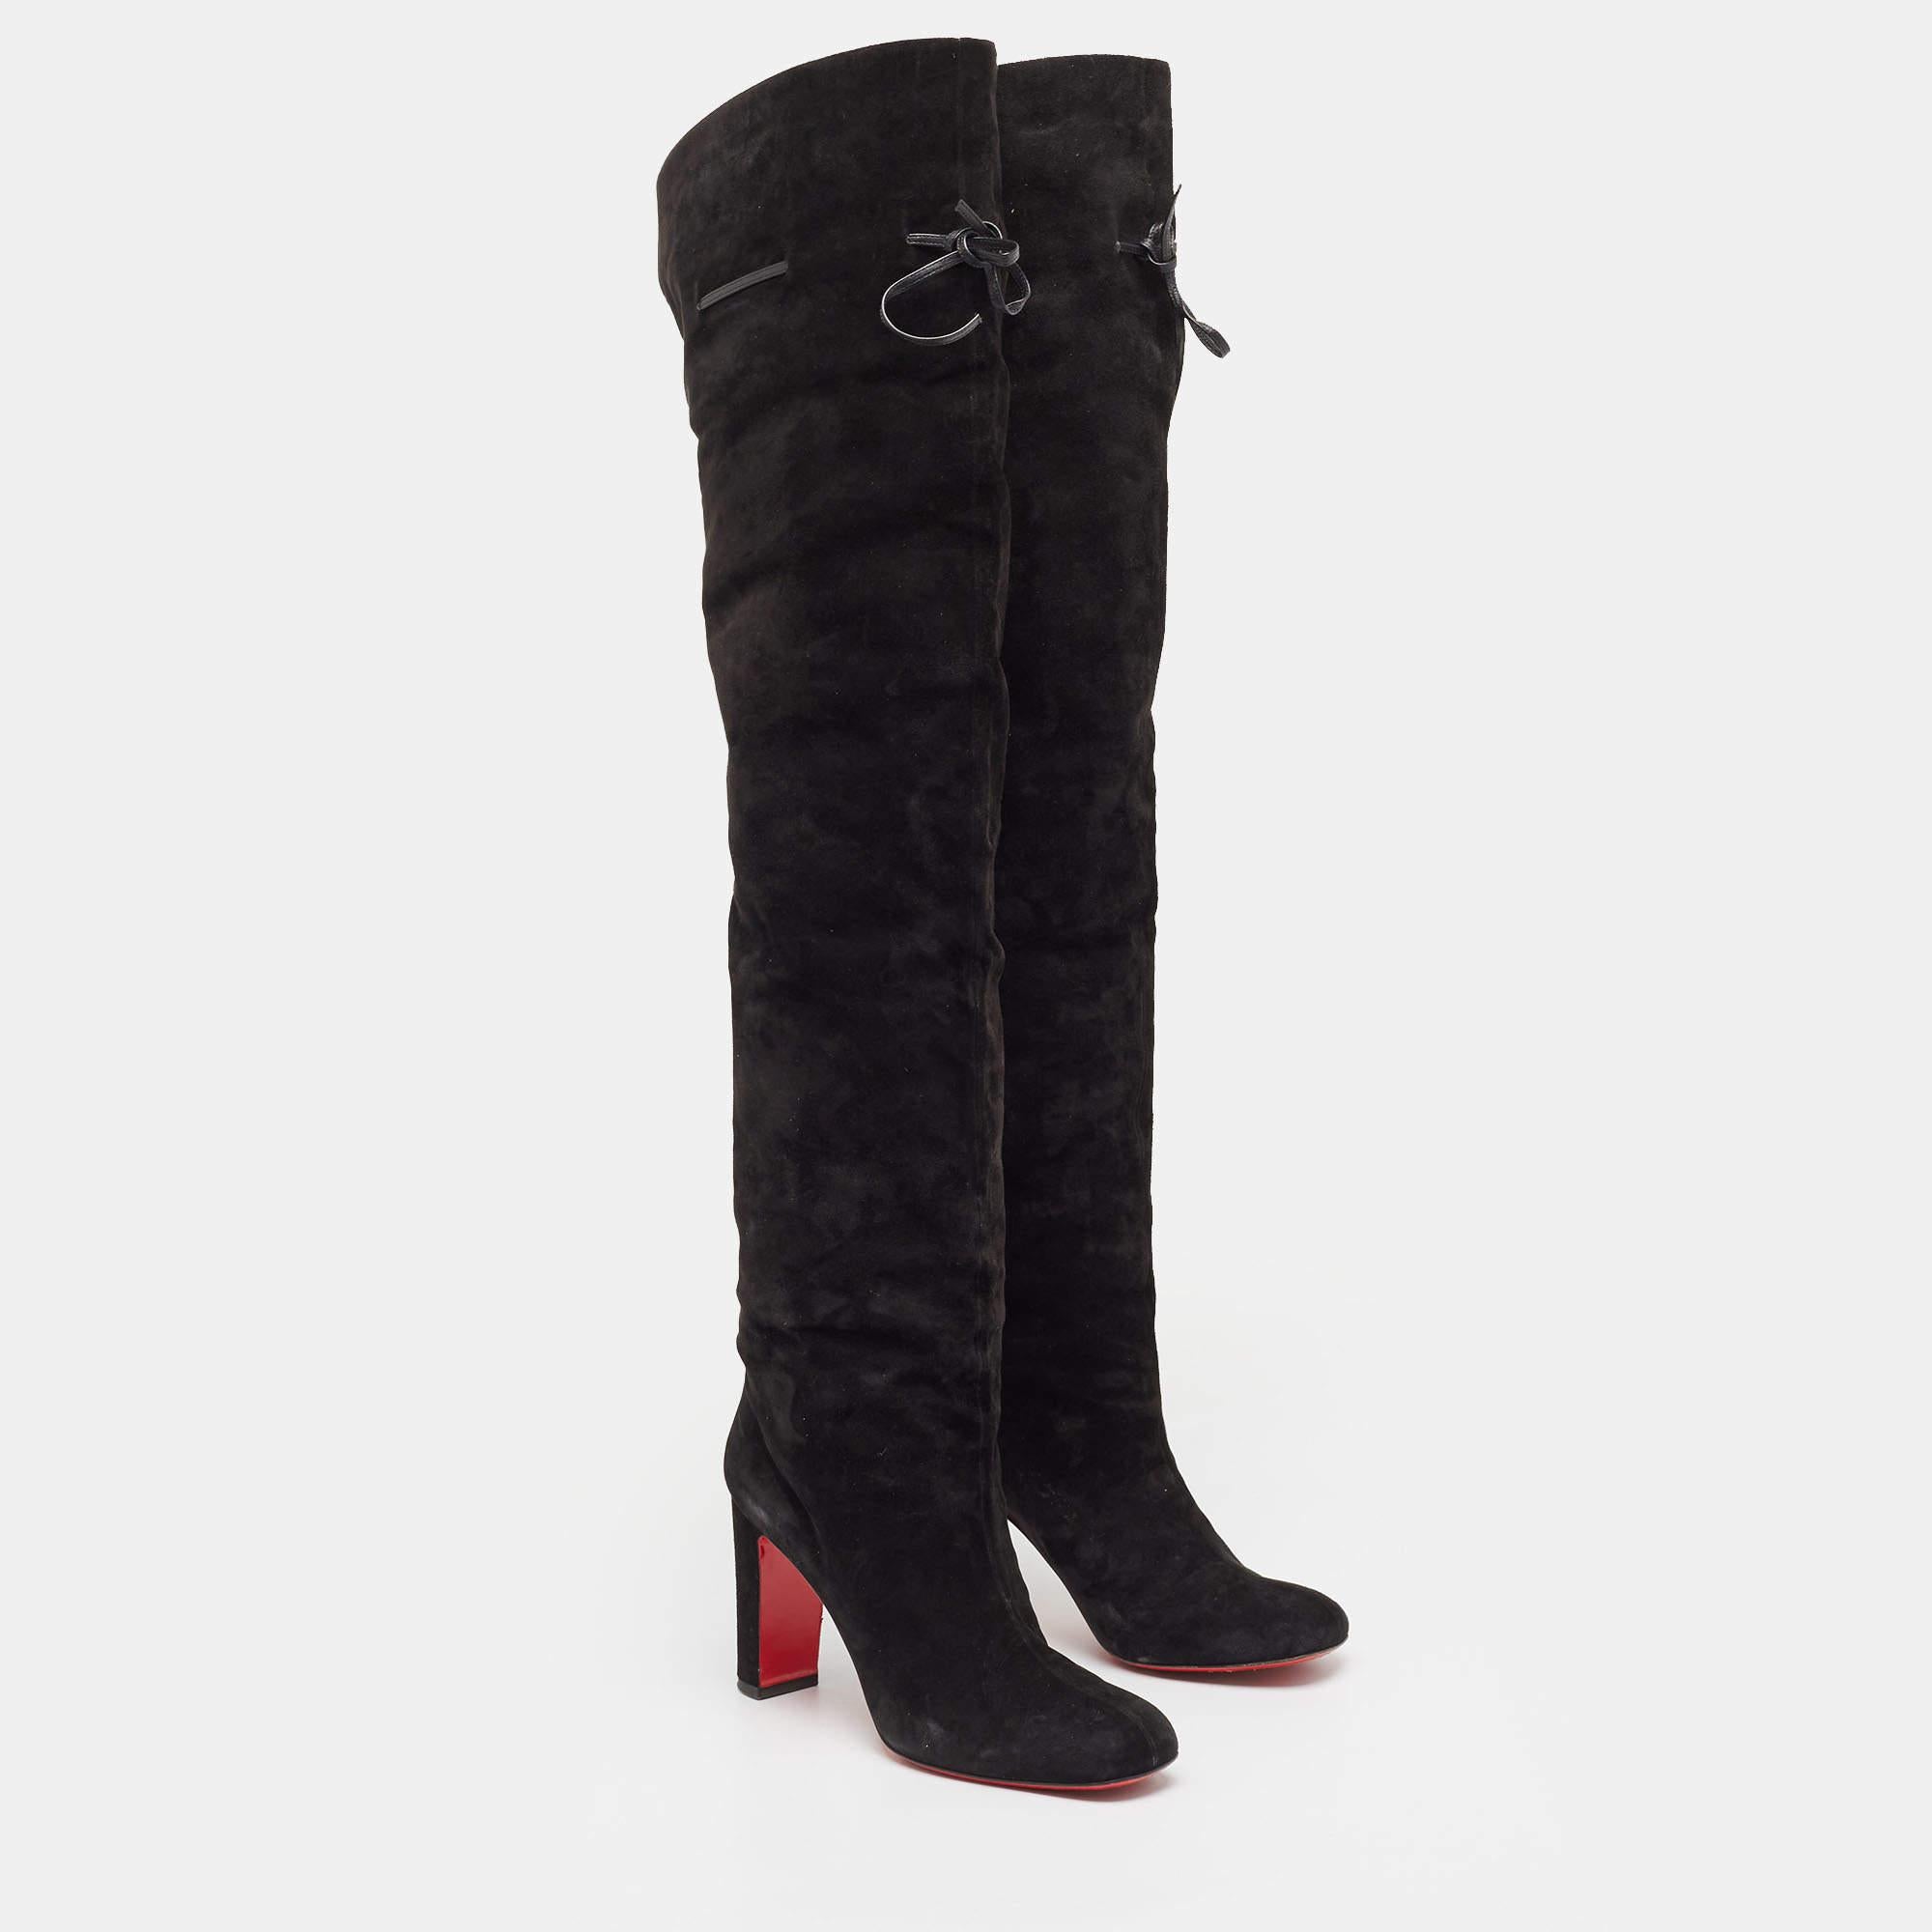 Christian Louboutin Black Suede Riding Over The Knee Length Boots Size 40 For Sale 2